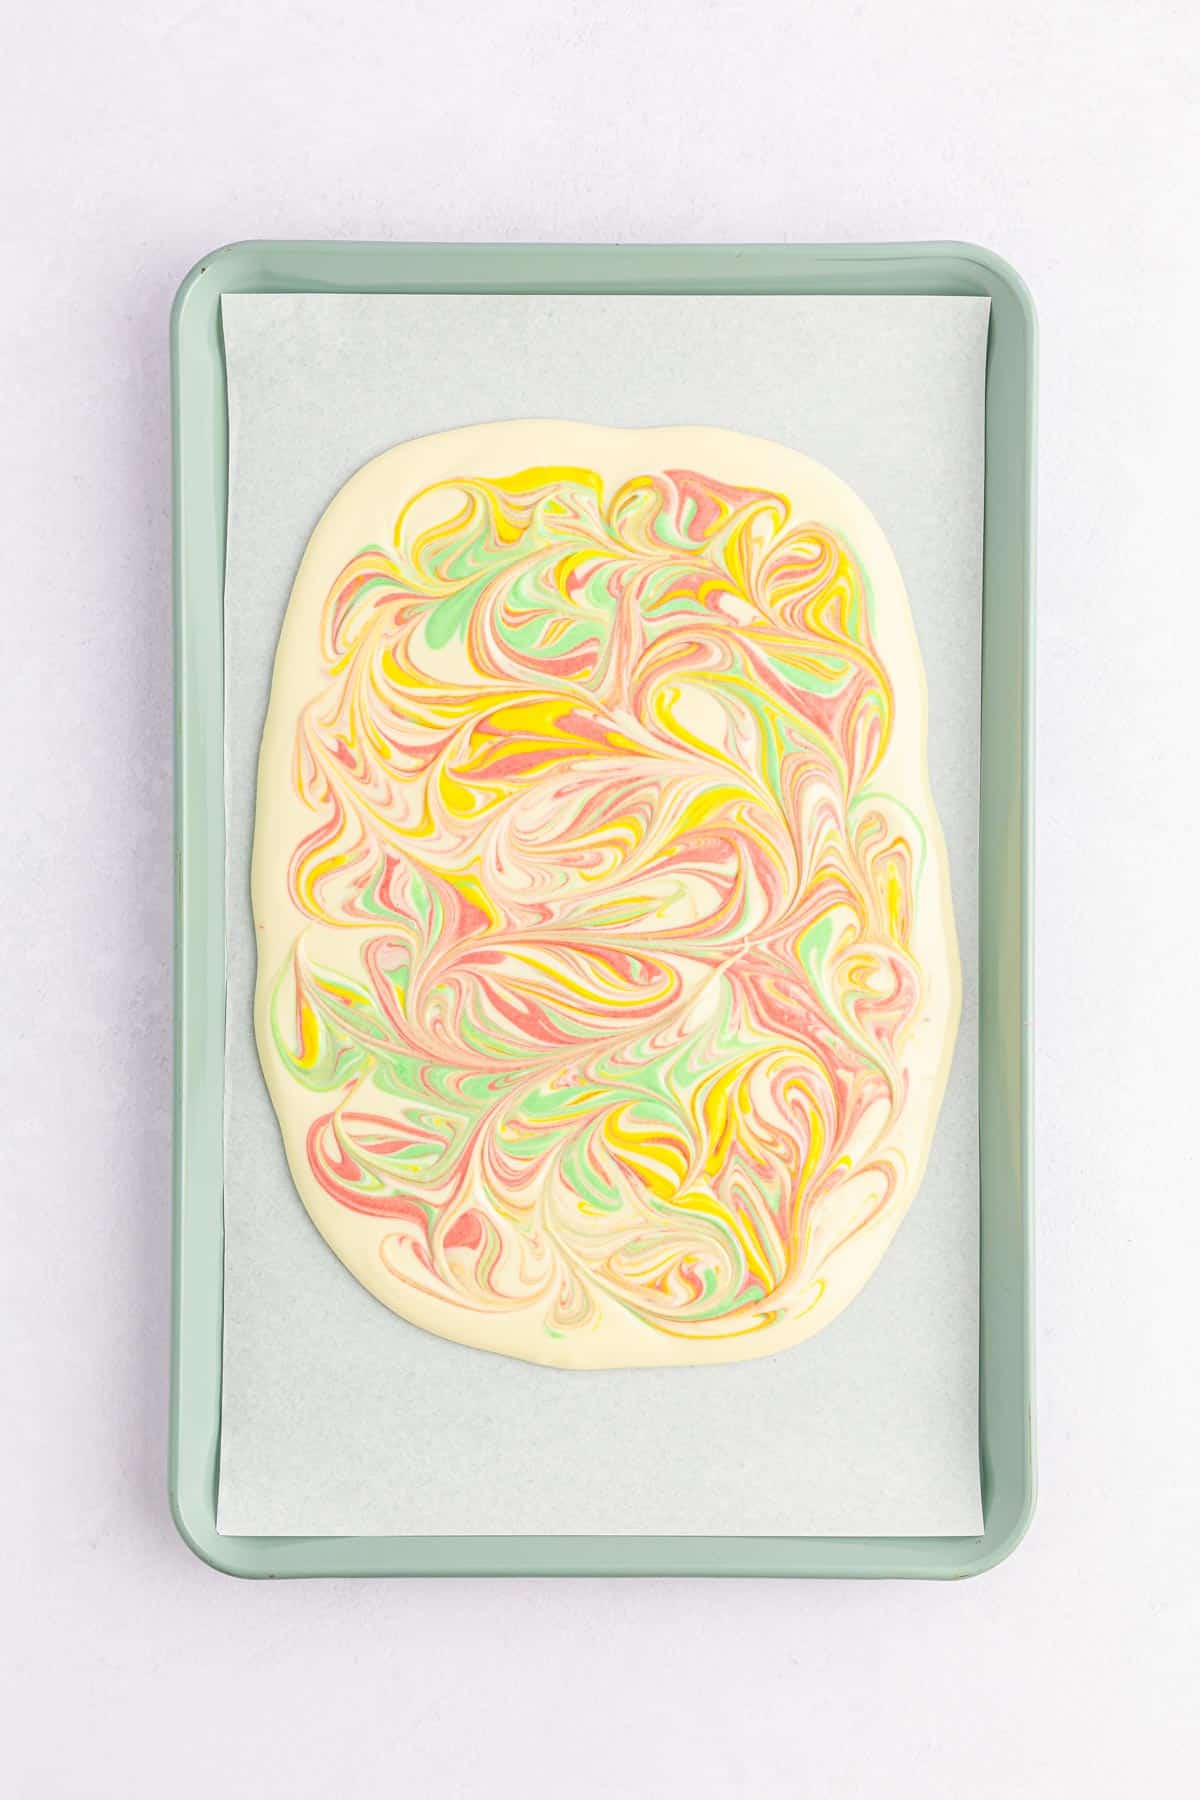 Red, yellow, and green colored white chocolate swirled through a white chocolate base for Easter bark.